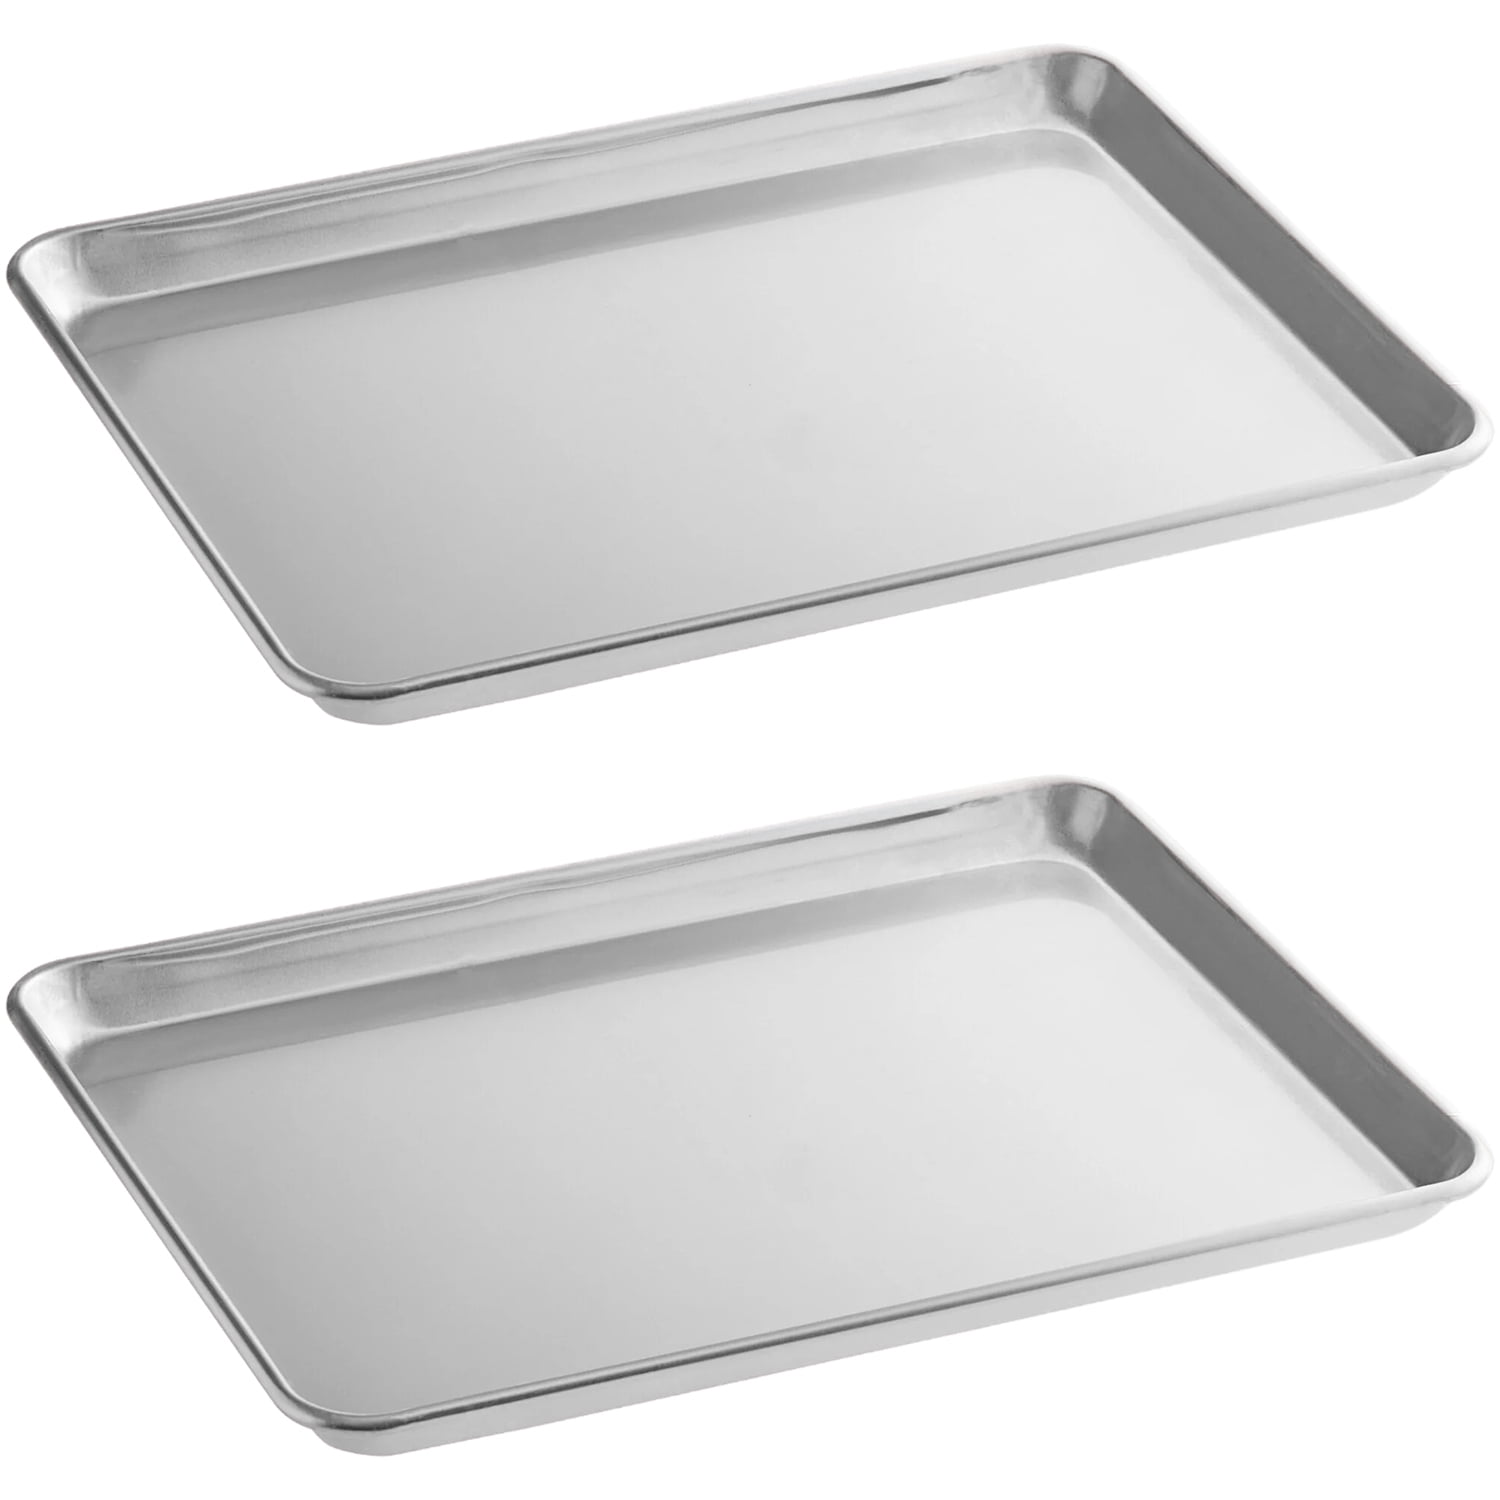 TrueCraftware Set of 2 Aluminum 18 x 13 Half Size Perforated Sheet Pan-  Baking Pan Baking Tray Cookie Sheet for Oven Perfect for Baking Roasting